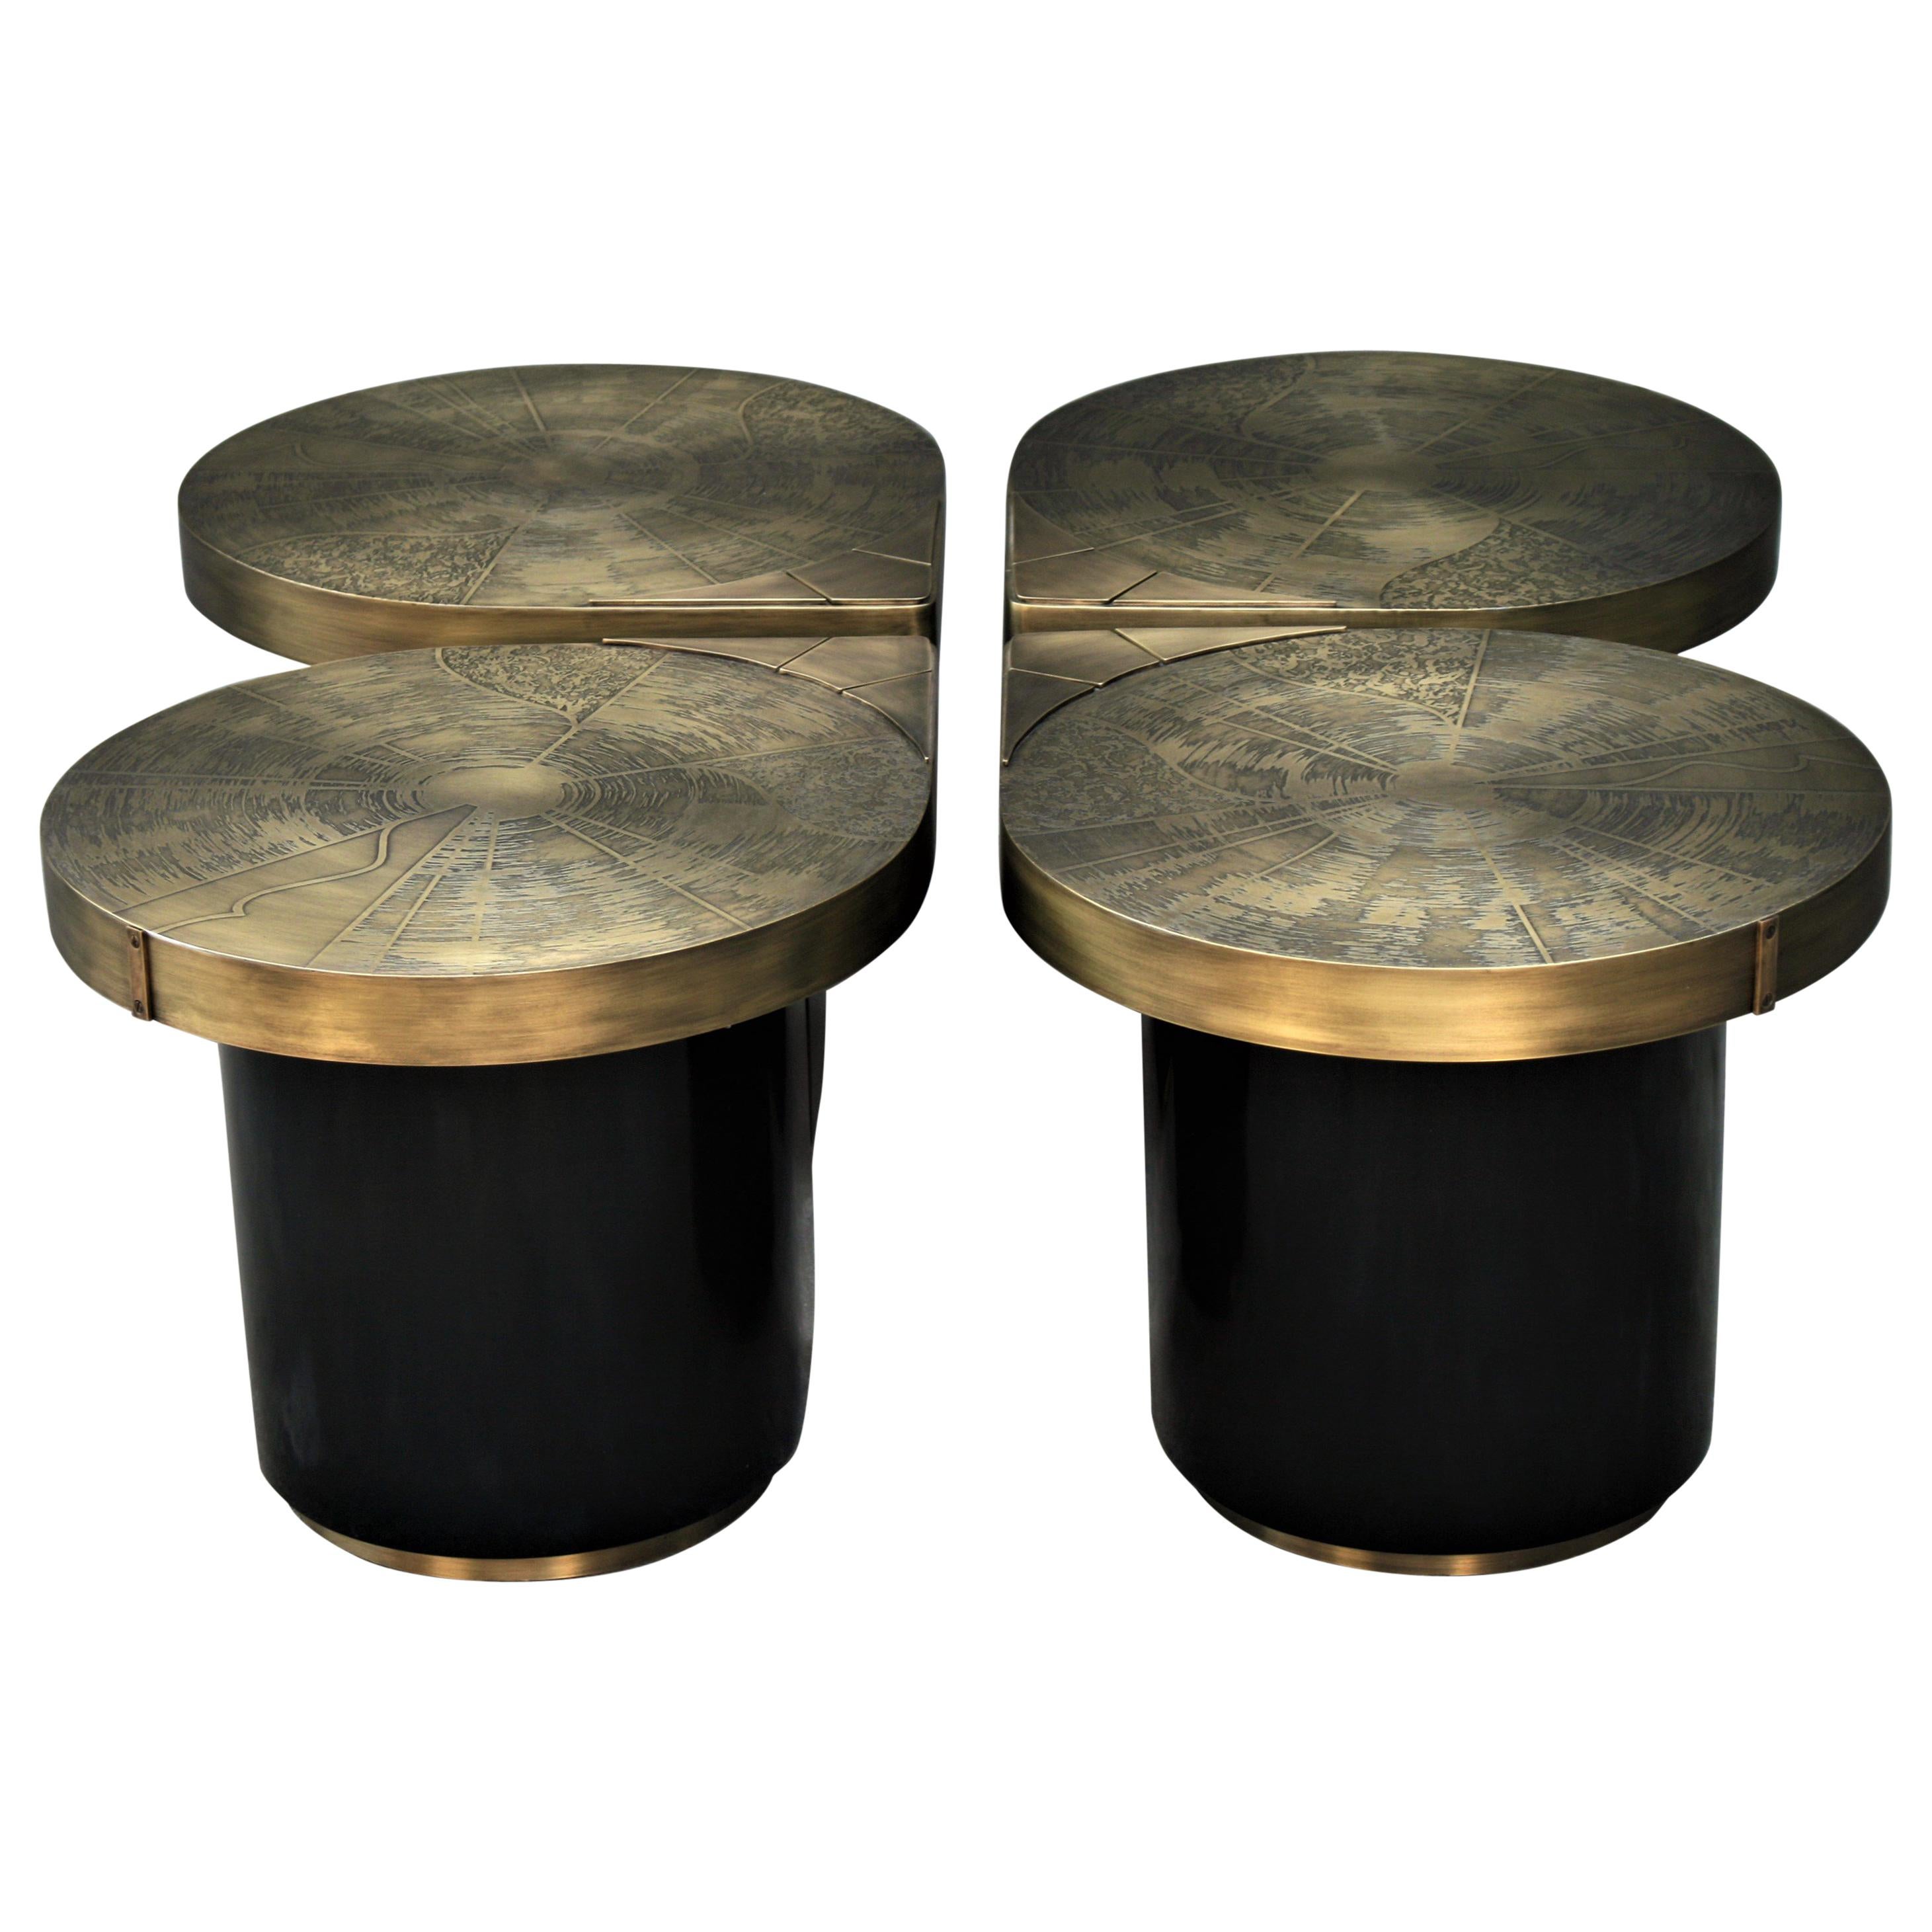 Four Matching Coffee Tables, Teardrops, Patinated Acid Etched Brass For Sale